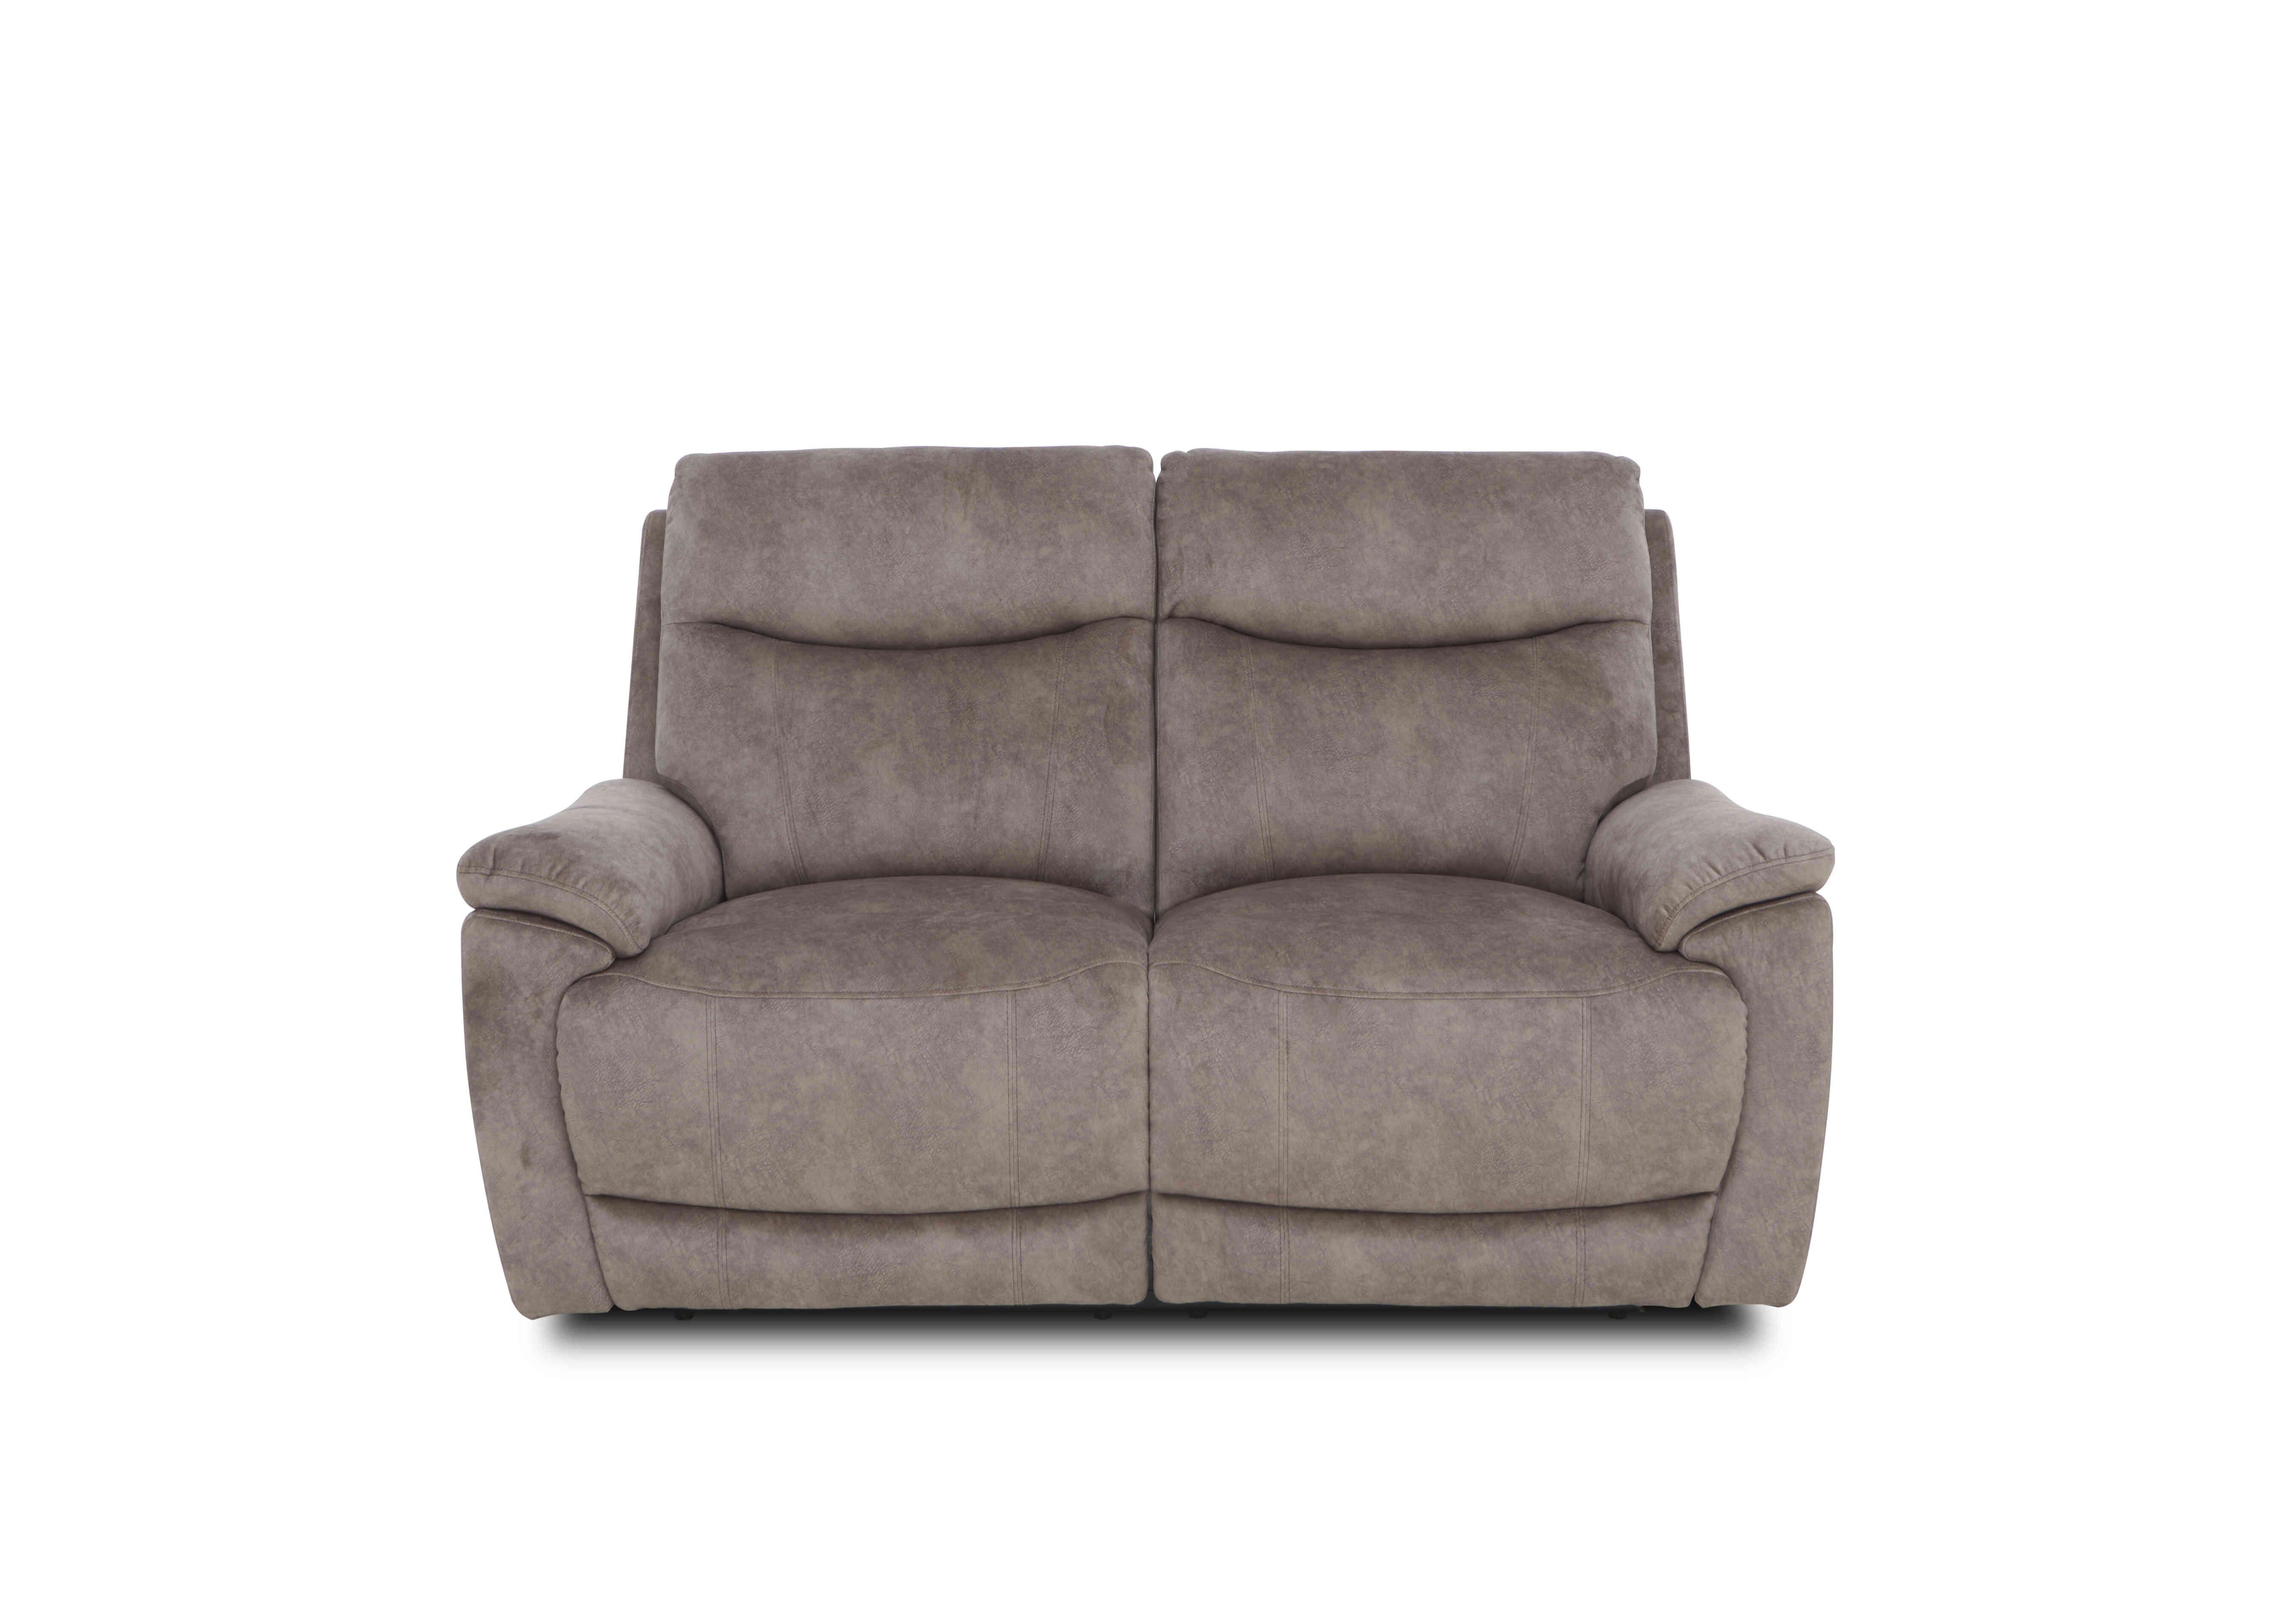 Sloane 2 Seater Fabric Sofa in 18175 Marble Charcoal Grey on Furniture Village